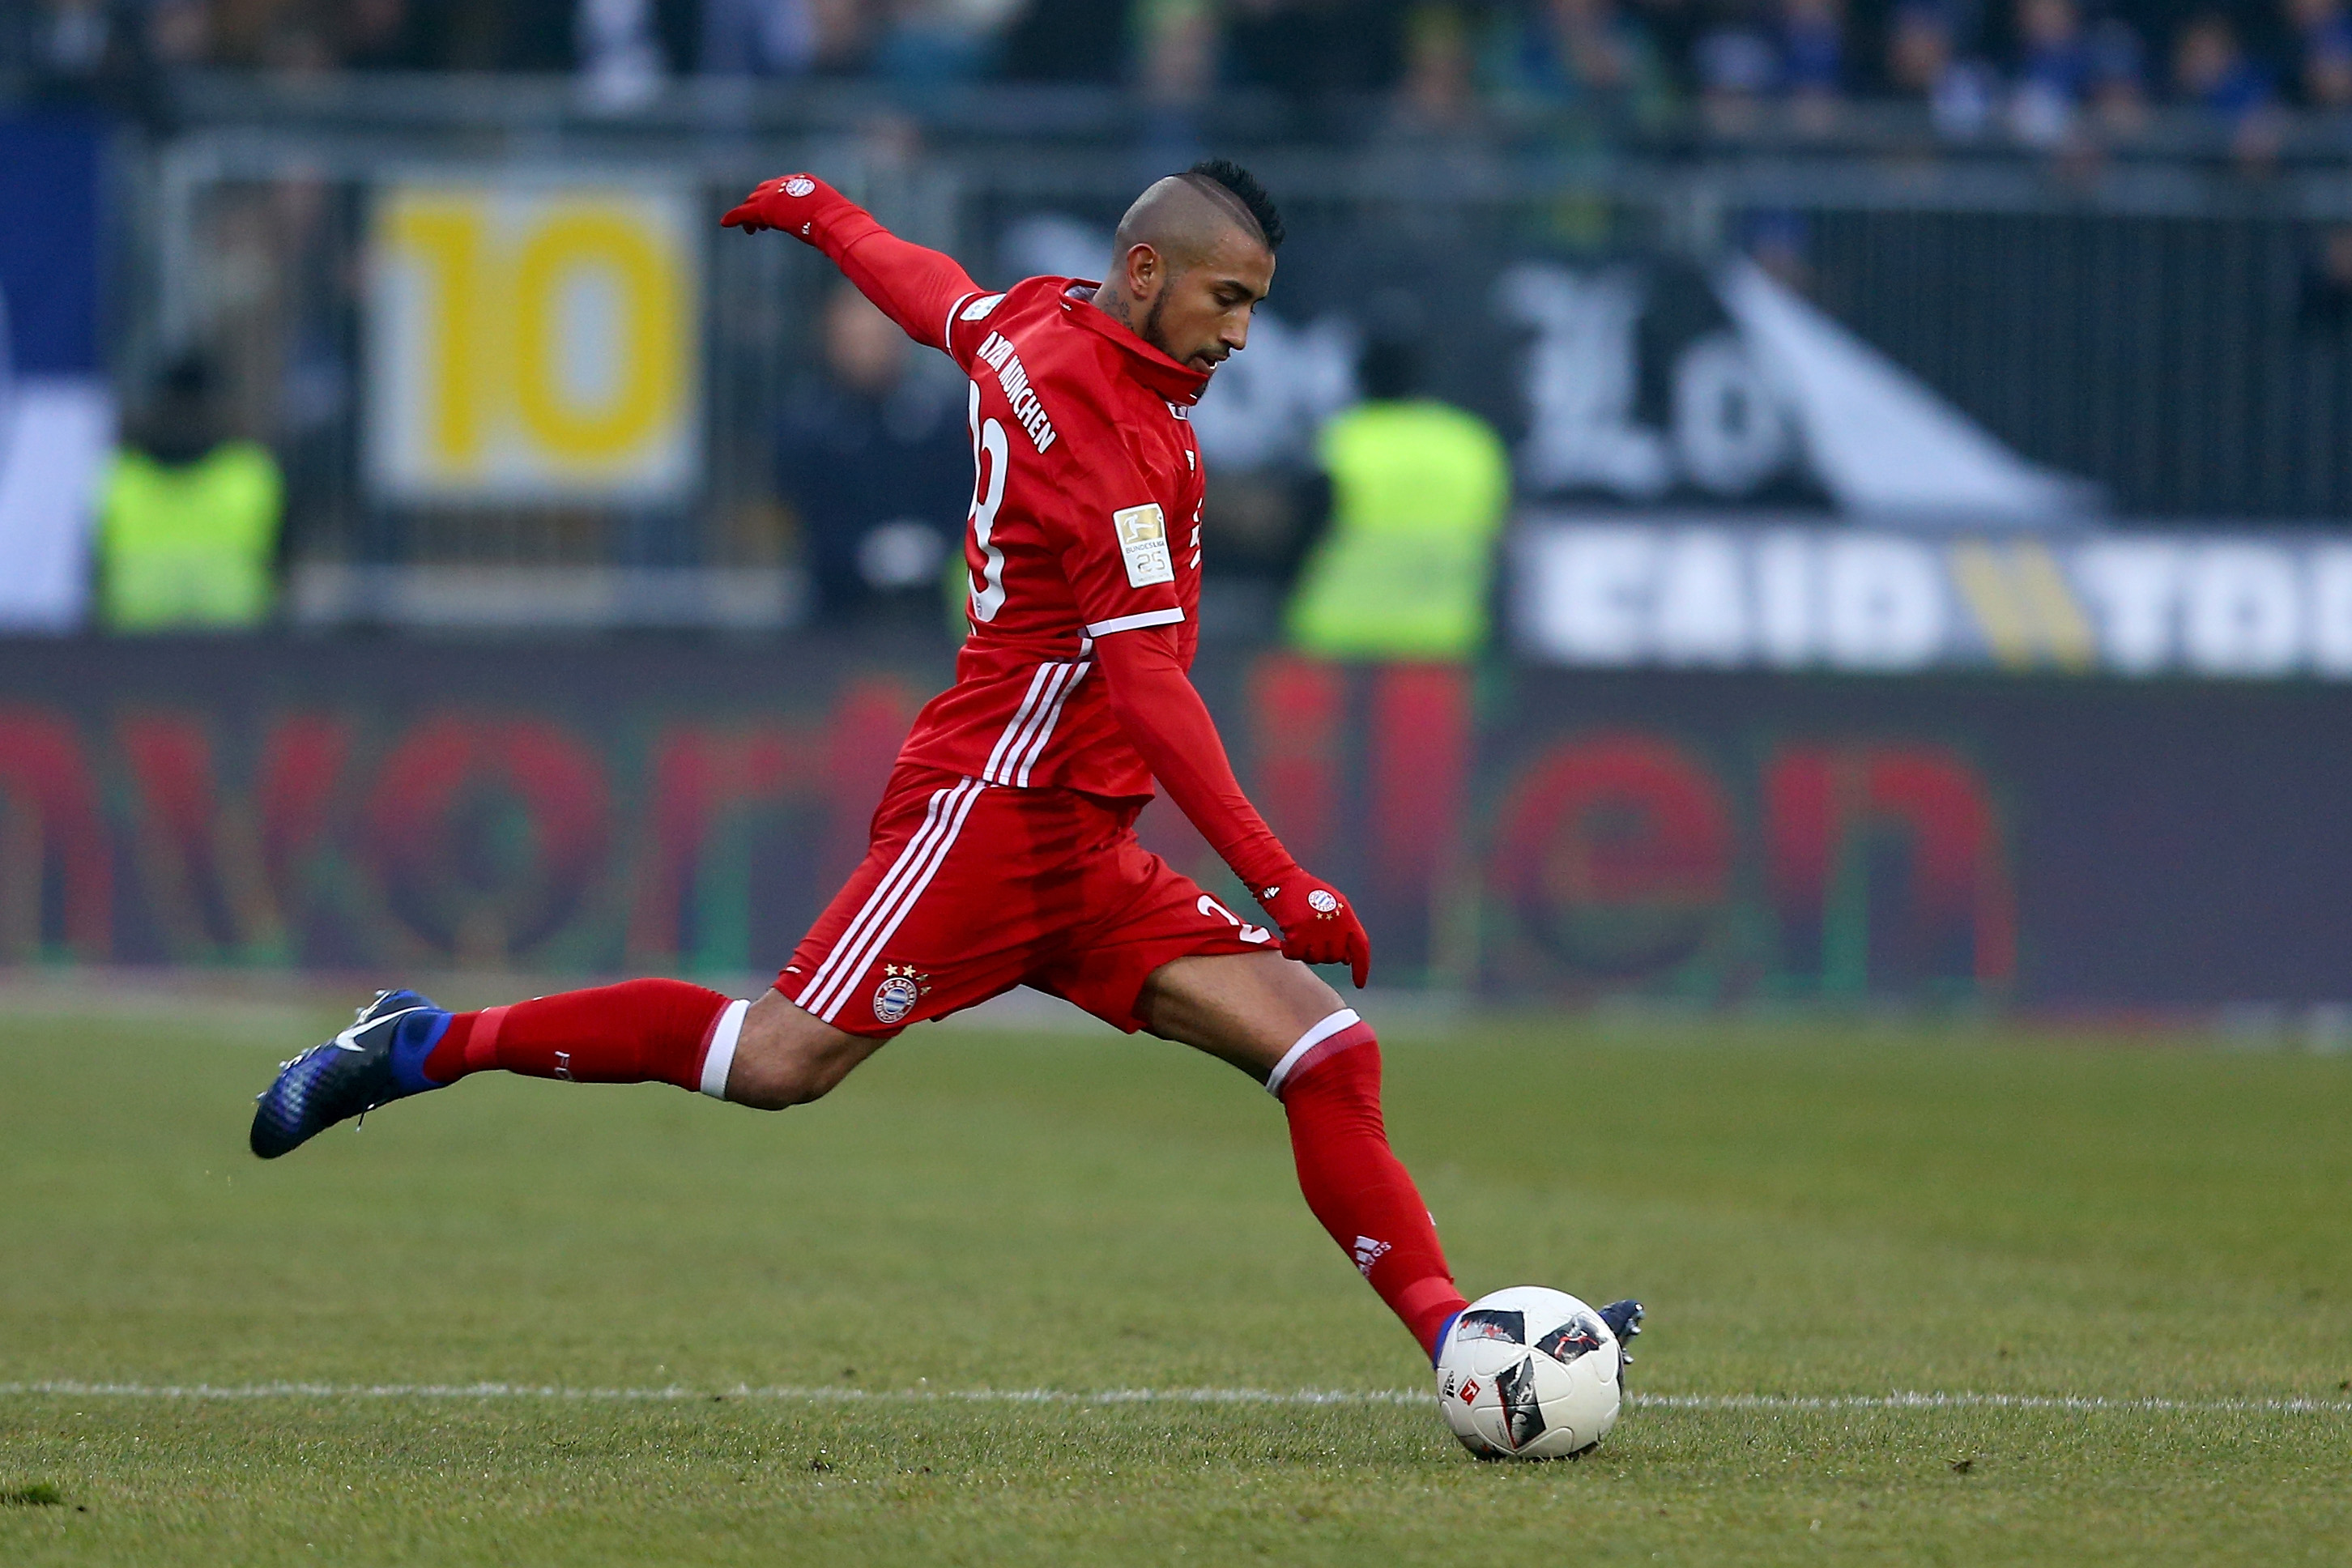 DARMSTADT, GERMANY - DECEMBER 18:  Arturo Vidal of Bayern runs with the ball  during the Bundesliga match between SV Darmstadt 98 and Bayern Muenchen at Stadion am Boellenfalltor on December 18, 2016 in Darmstadt, Germany.  (Photo by Christof Koepsel/Bongarts/Getty Images)